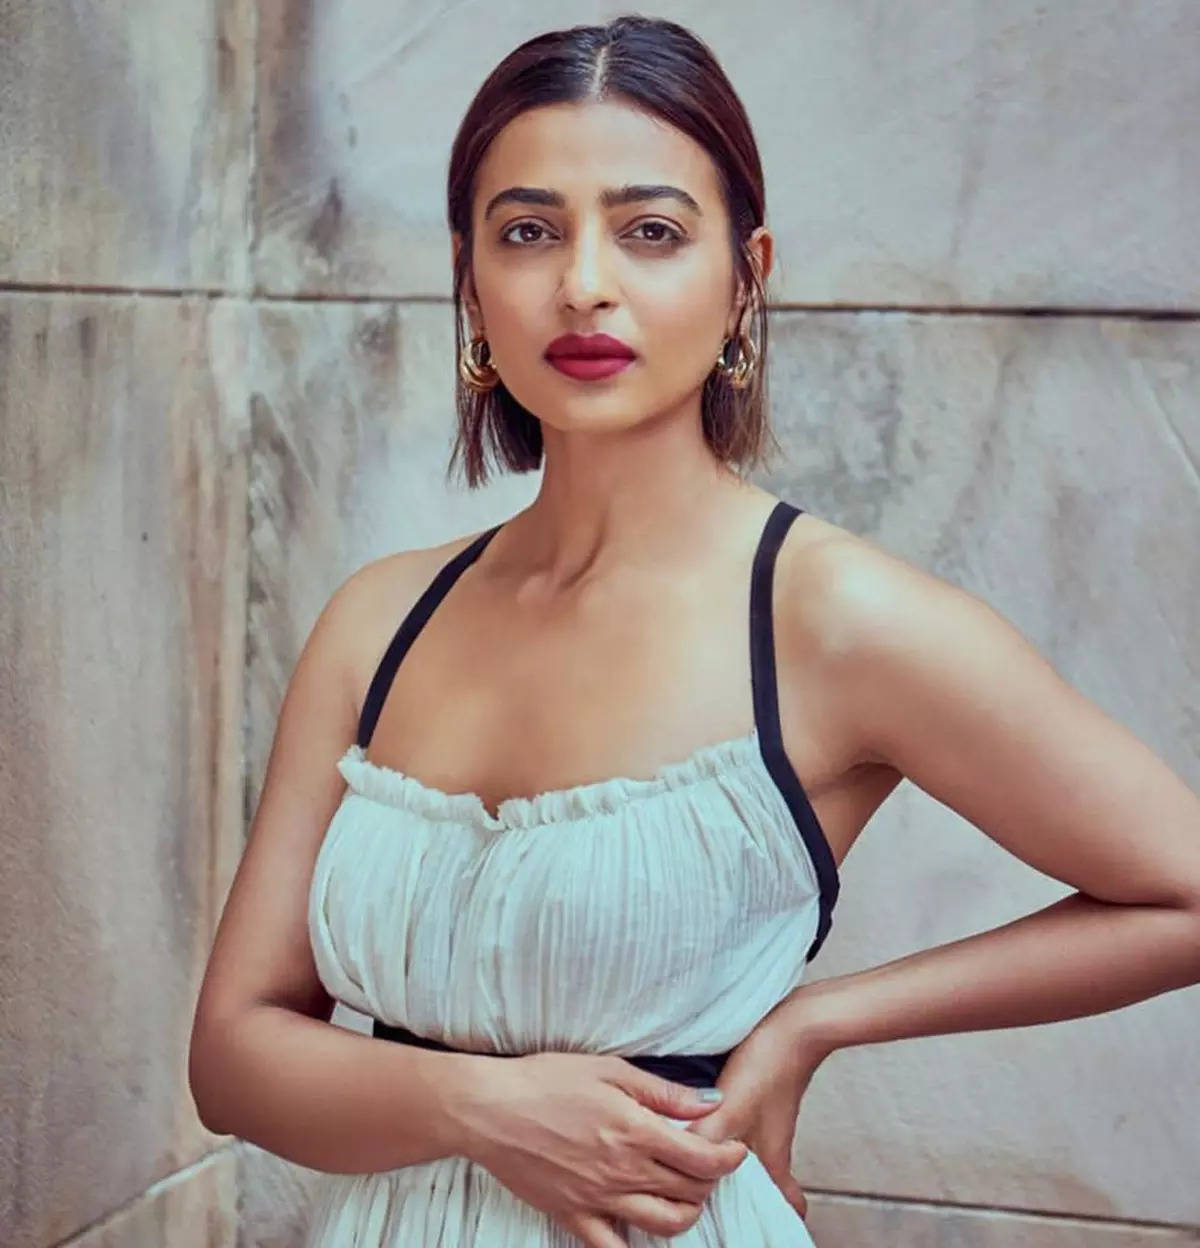 Radhika Apte beats the heat in style, checkout her stunning photos!